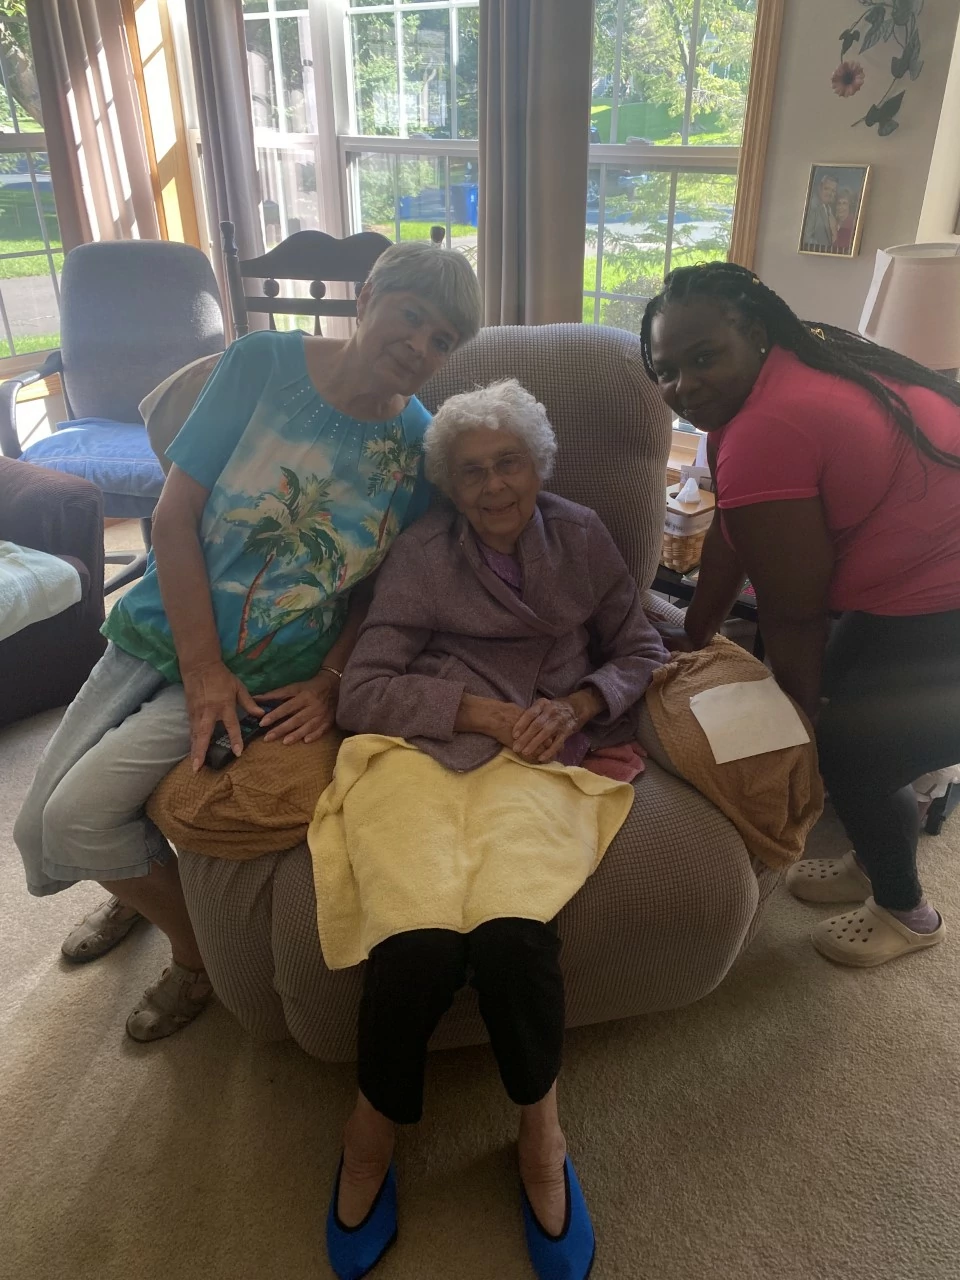 Here is a picture of our client, her daughter, and her caregiver. We had a wonderful visit and even brought treats. Tasha and Gladys love to watch tv shows and do crossword puzzles together!